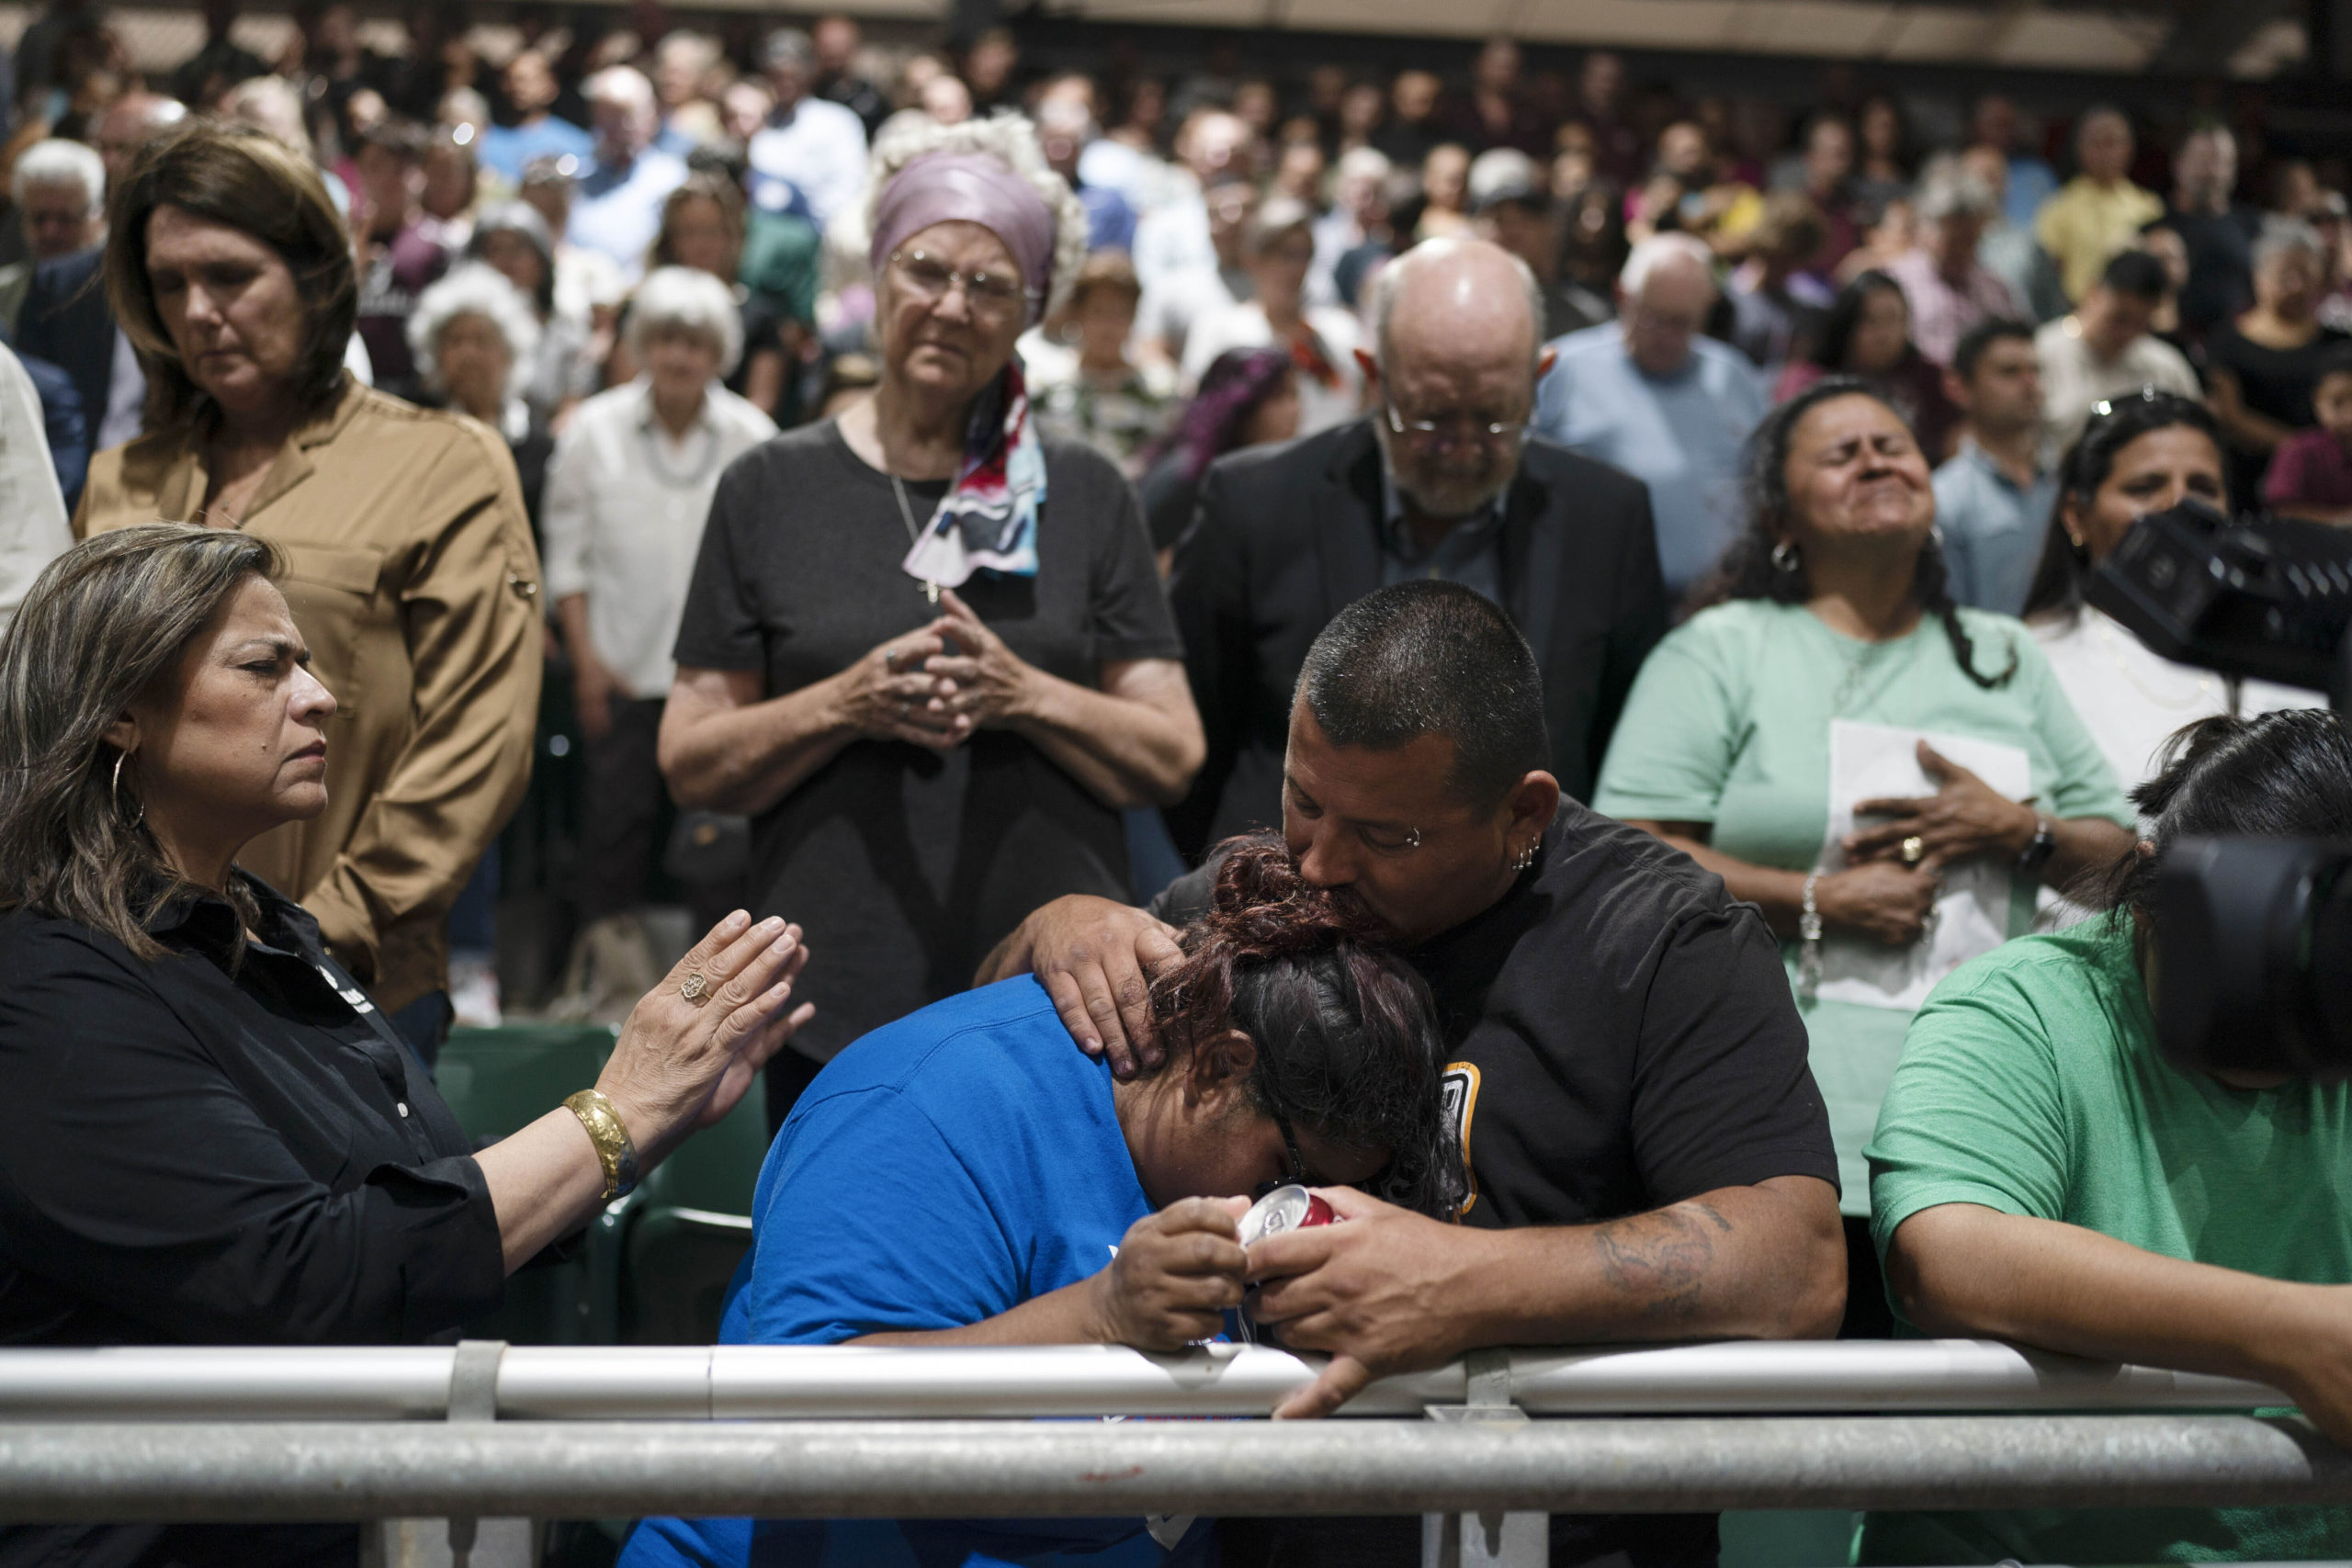 Two family members of one of the victims killed in Tuesday's shooting at Robb Elementary School comfort each other during a prayer vigil in Uvalde, Texas, Wednesday, May 25, 2022. (AP Photo/Jae C. Hong)